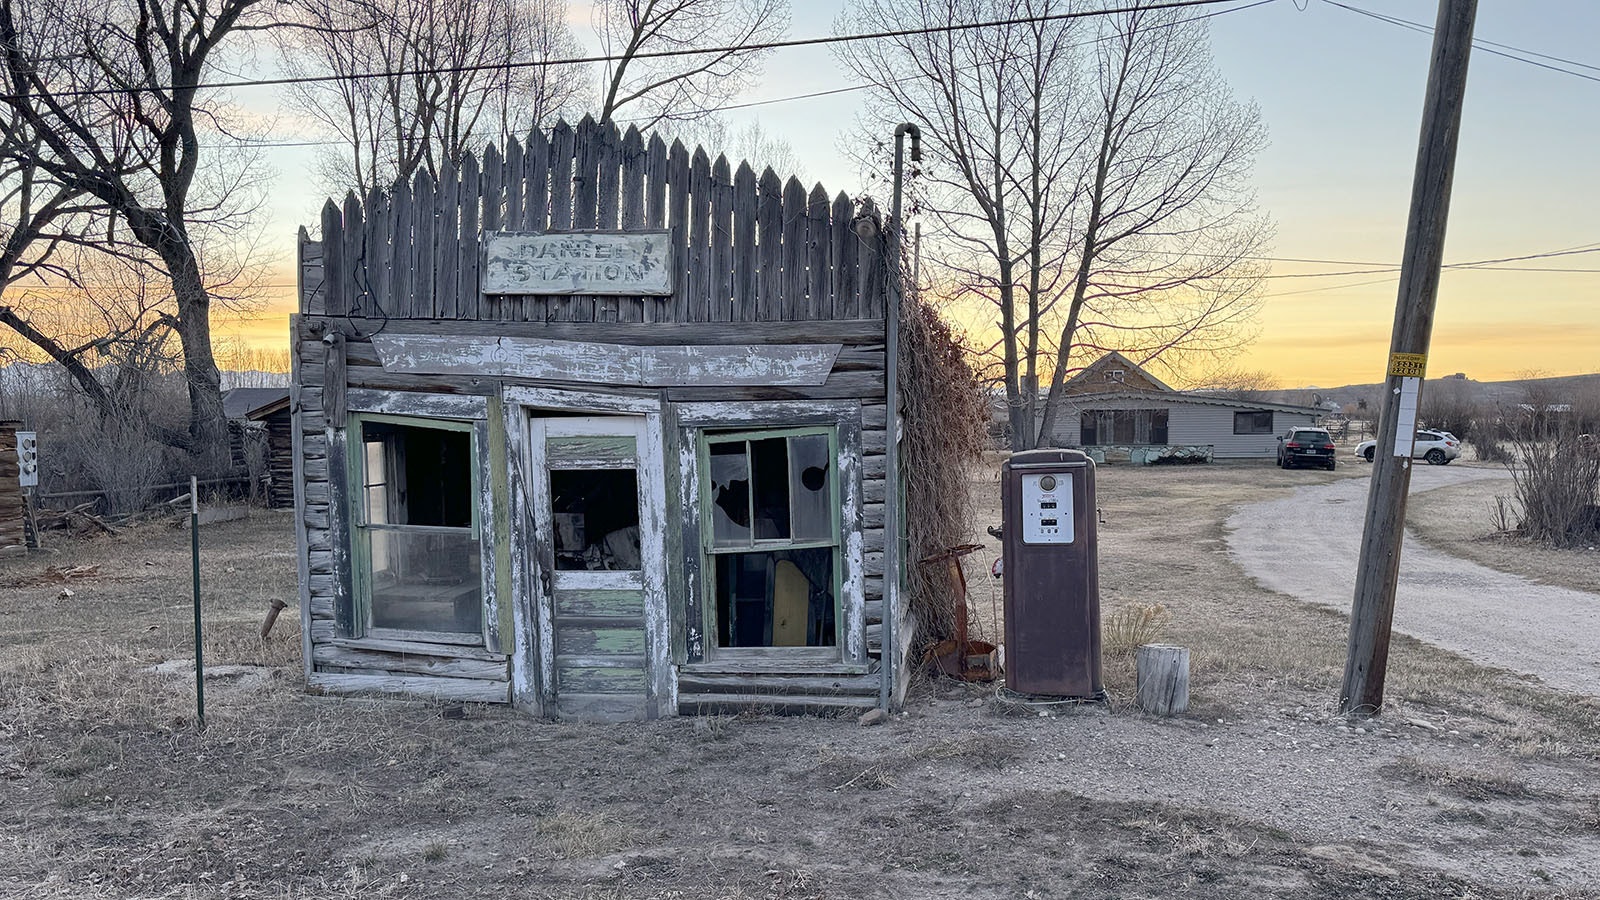 A more than 100-year old gas filling station across the street from the Green River Bar.